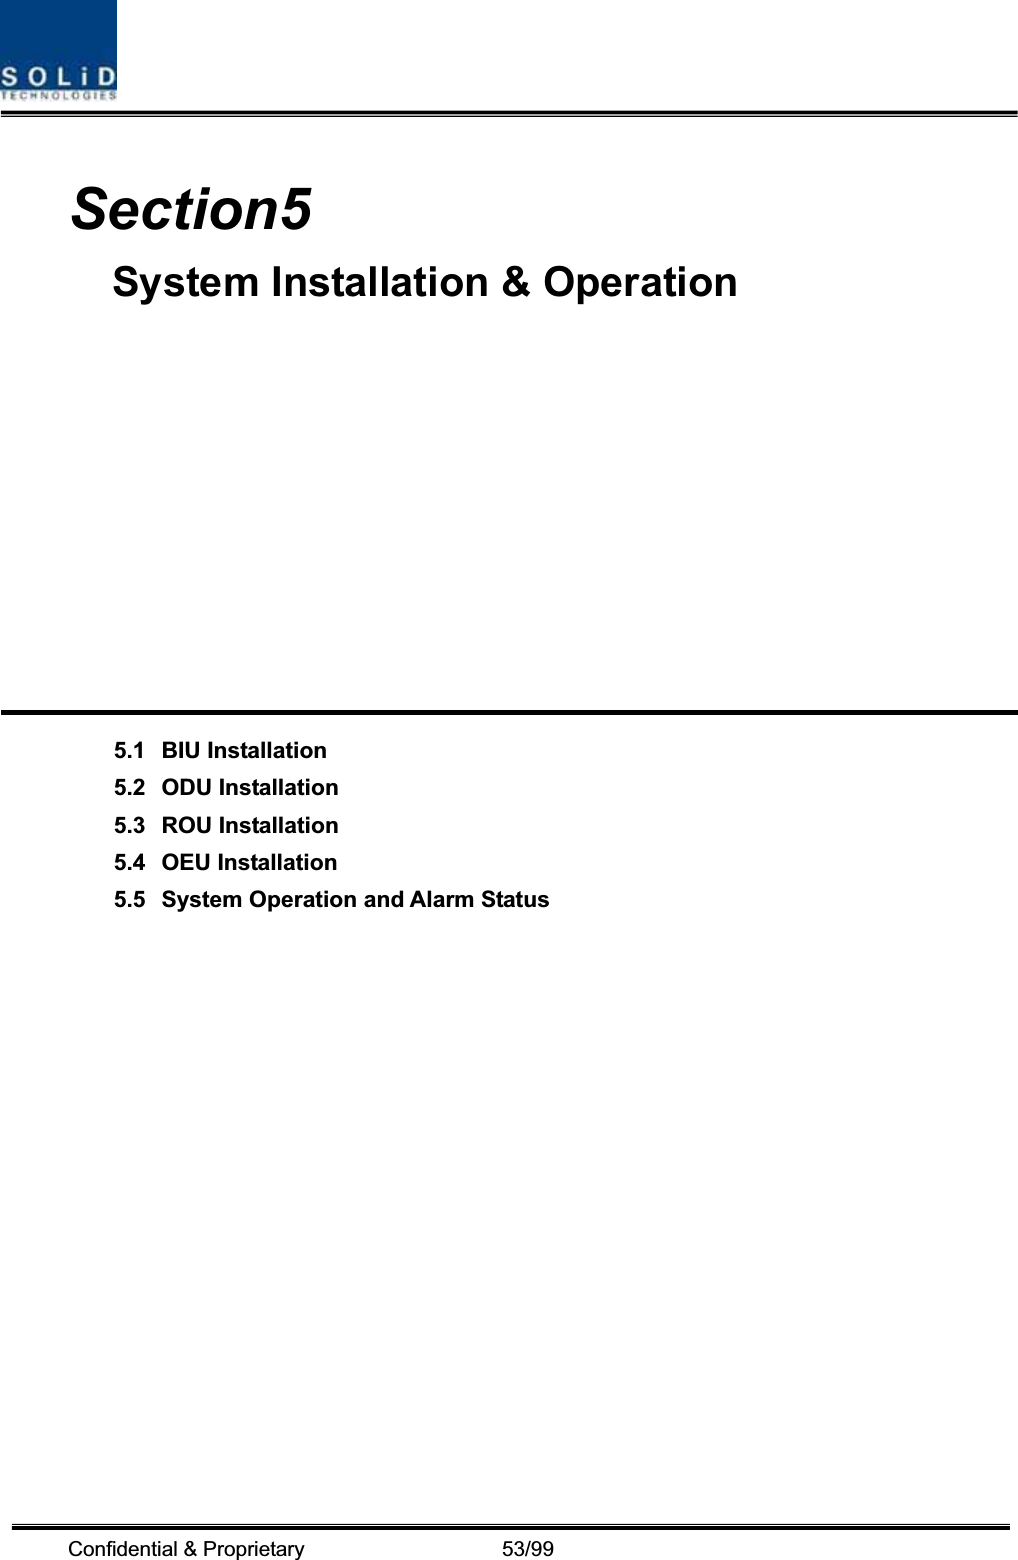 Confidential &amp; Proprietary                   53/99 Section5System Installation &amp; Operation 5.1 BIU Installation5.2 ODU Installation5.3 ROU Installation5.4 OEU Installation5.5 System Operation and Alarm Status